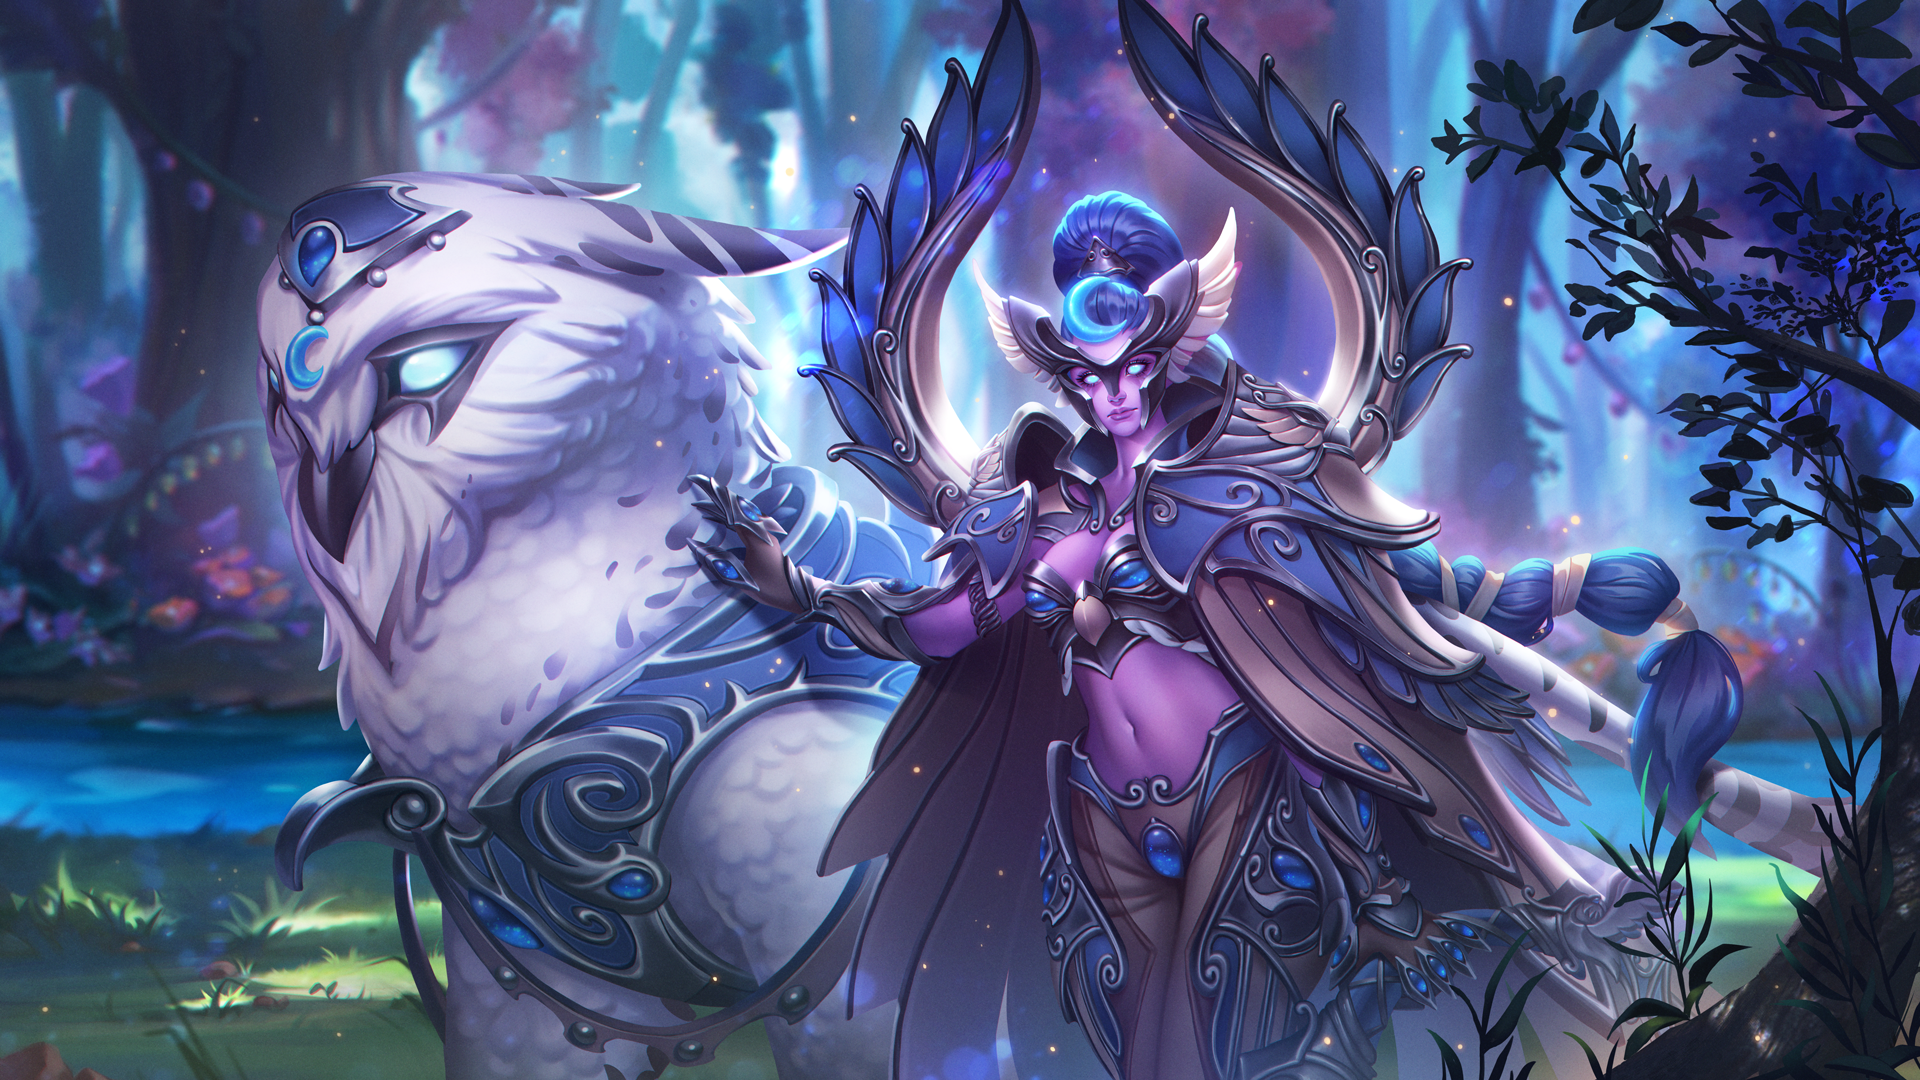 General 1920x1080 Maiev Shadowsong night elves Heroes of the Storm belly forest Warcraft Blizzard Entertainment long hair fantasy girl women digital art